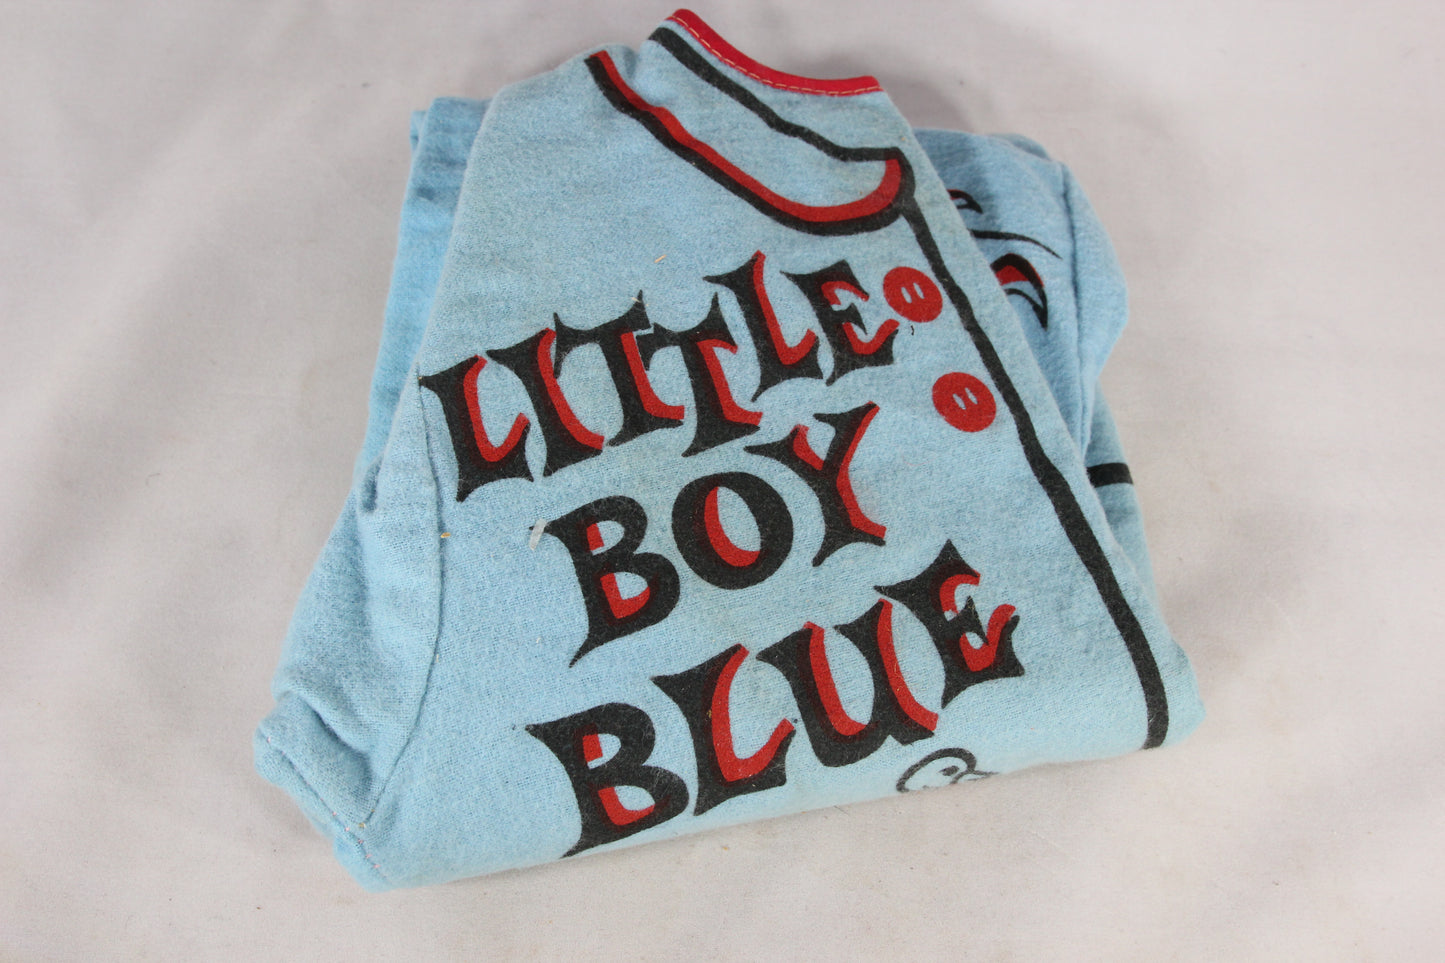 Little Boy Blue PJ Costume and Mask by Halco (In Box)